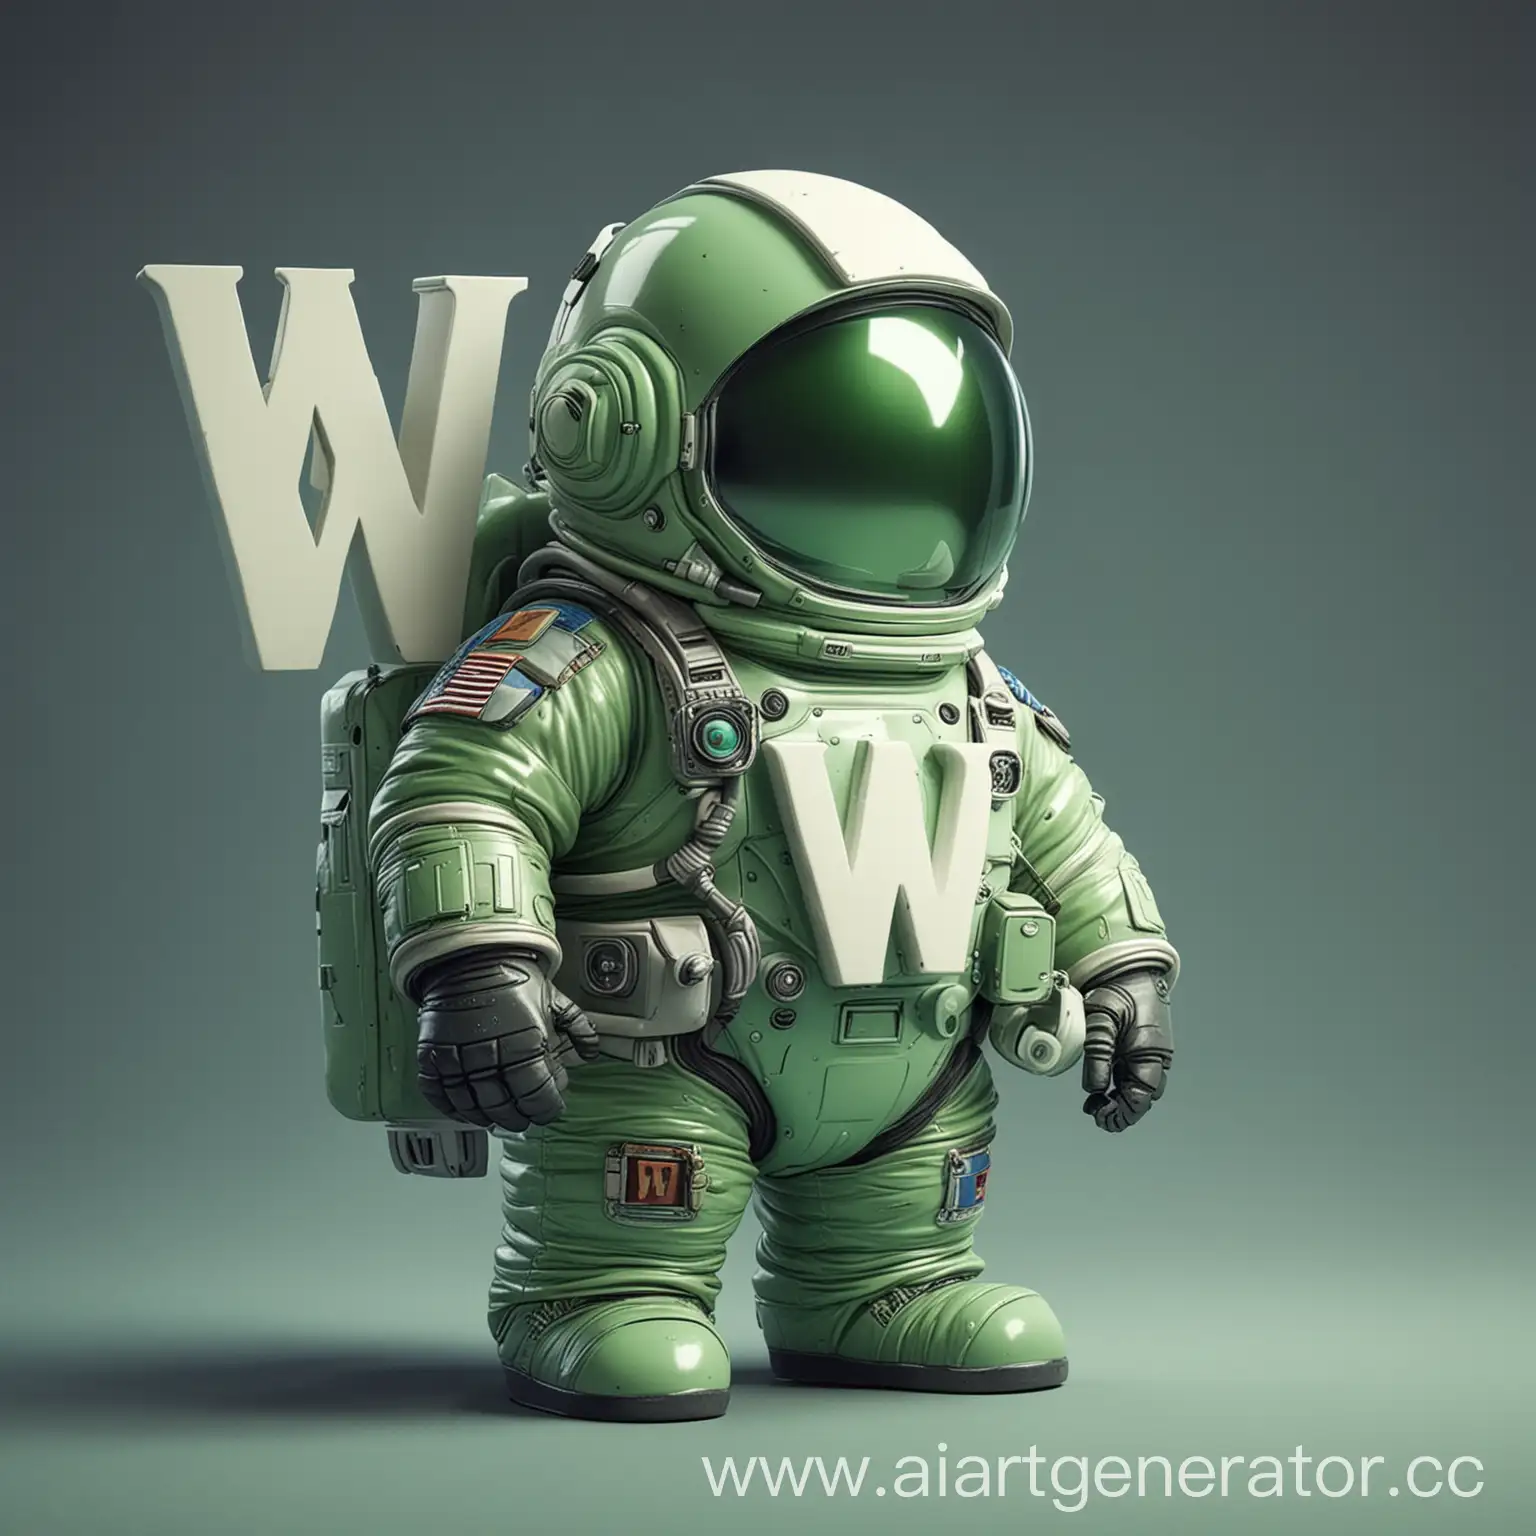 Cheerful-Chubby-Astronaut-with-Green-Spacesuit-and-Letter-W-on-Helmet